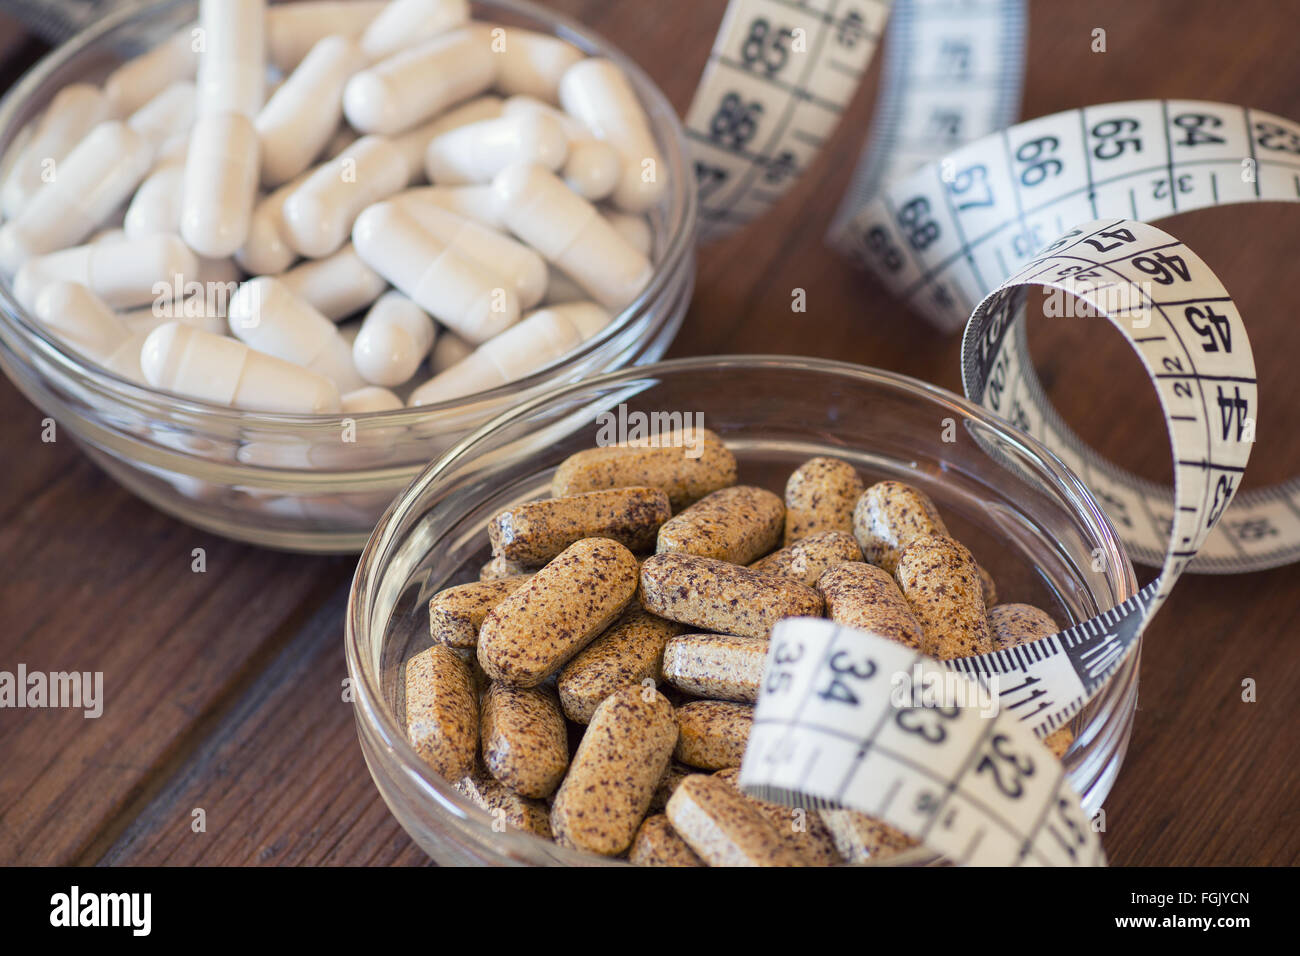 Nutritional supplements in capsules and tablets. Stock Photo